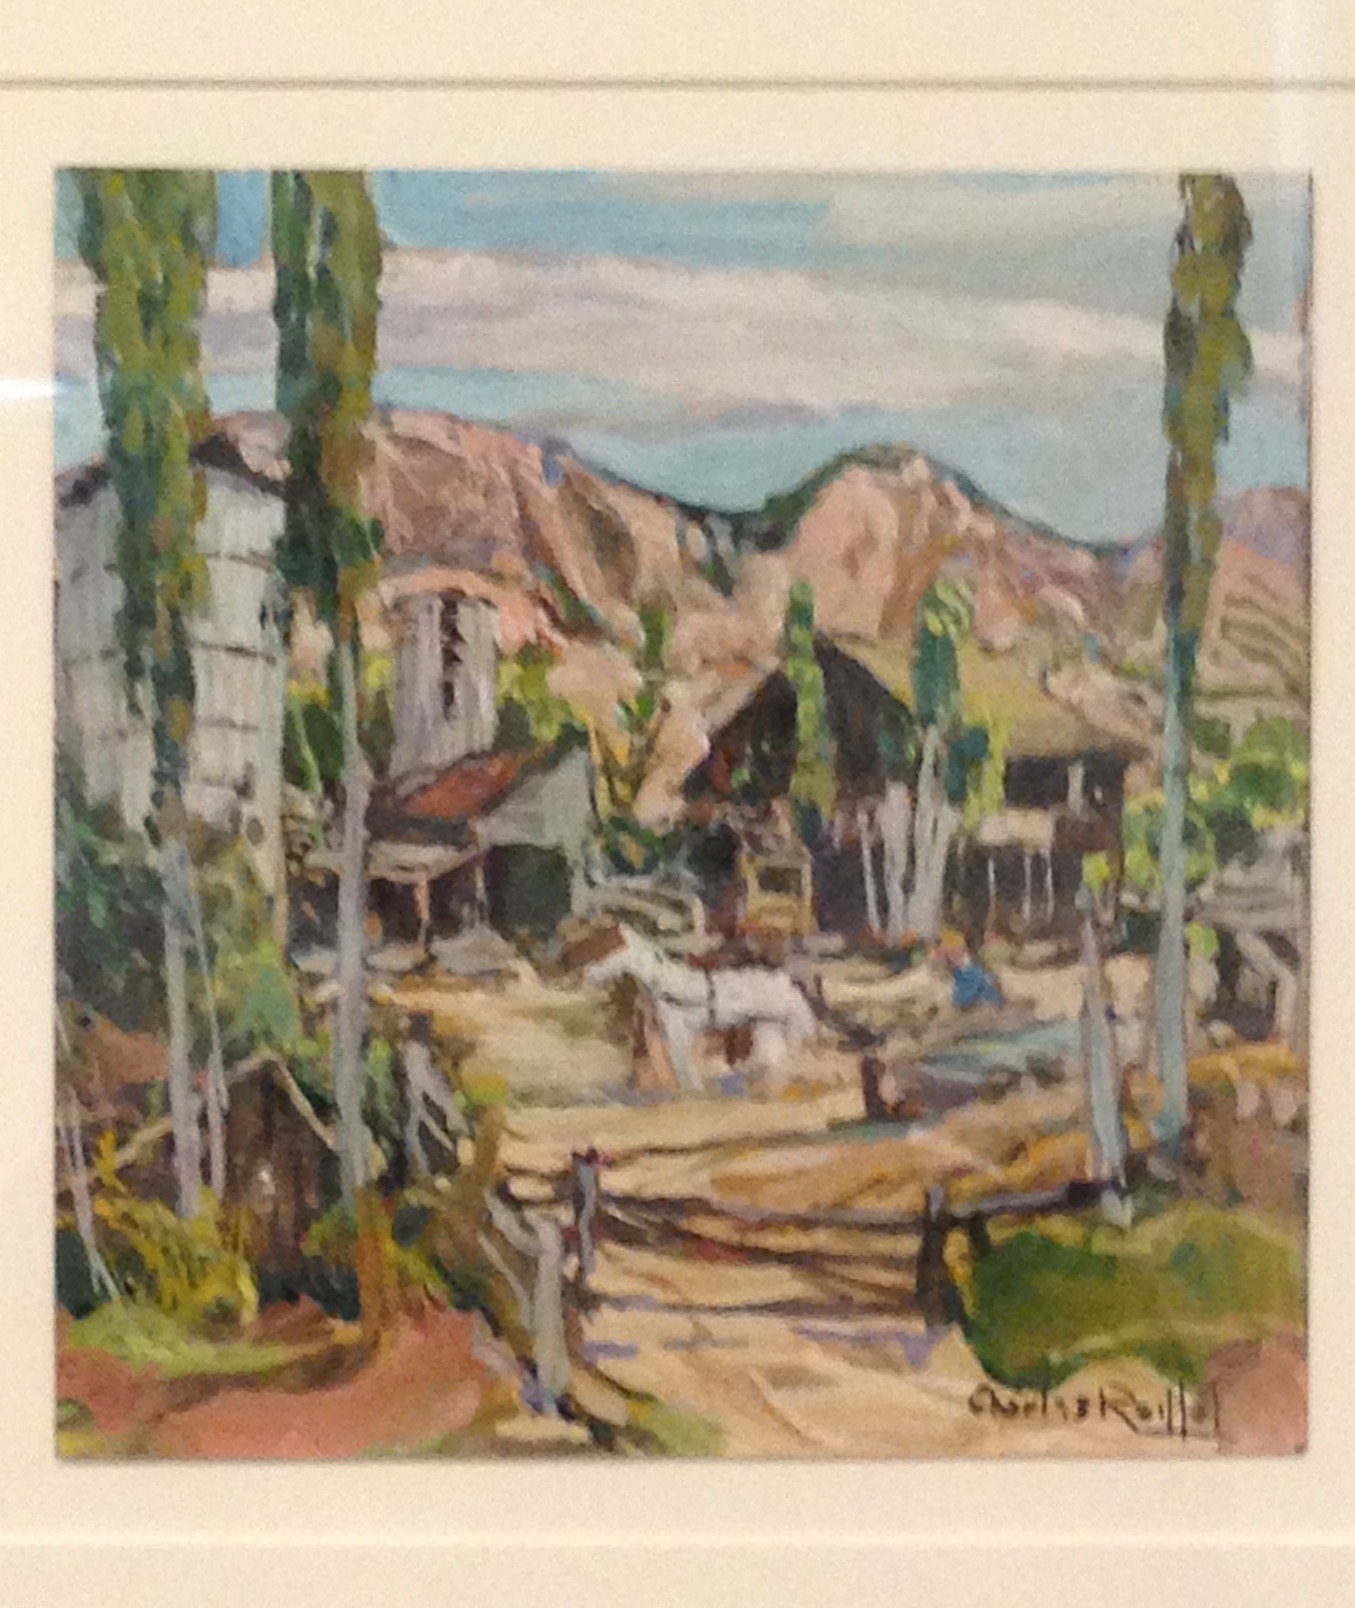 Charles Reiffel, Old Ranch Mission Valley, 1930